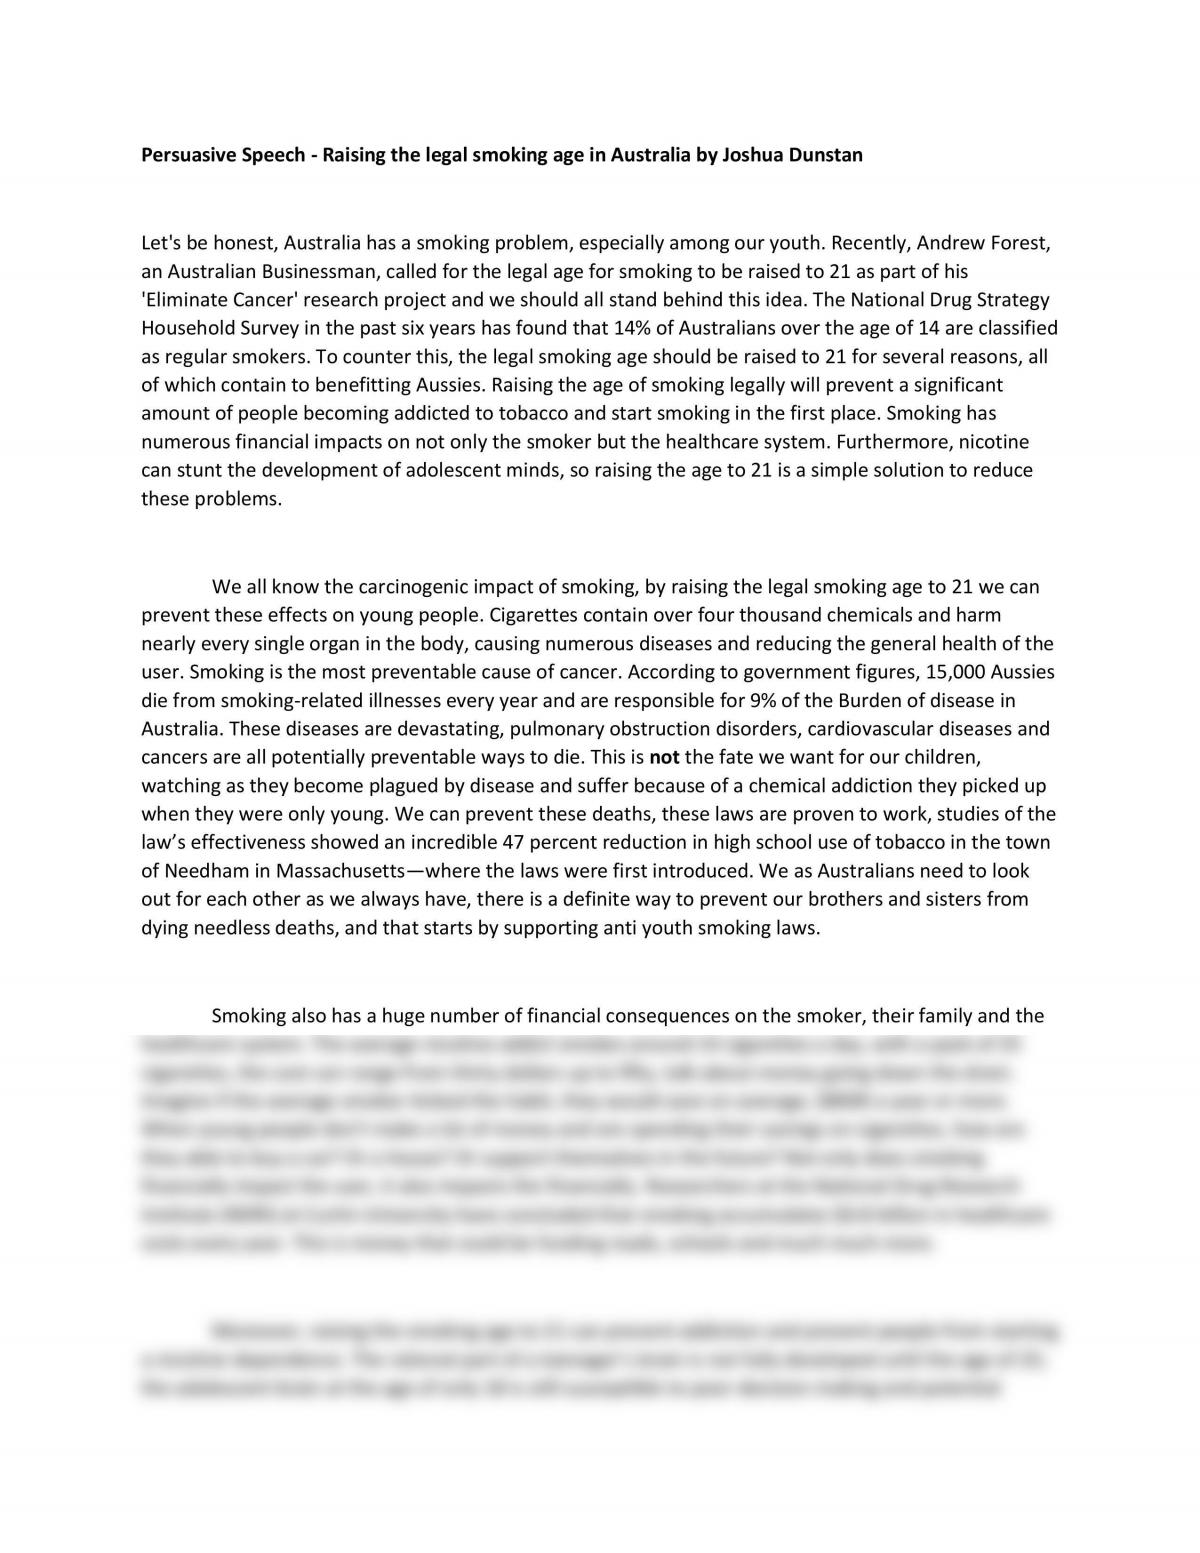 essay about smoking